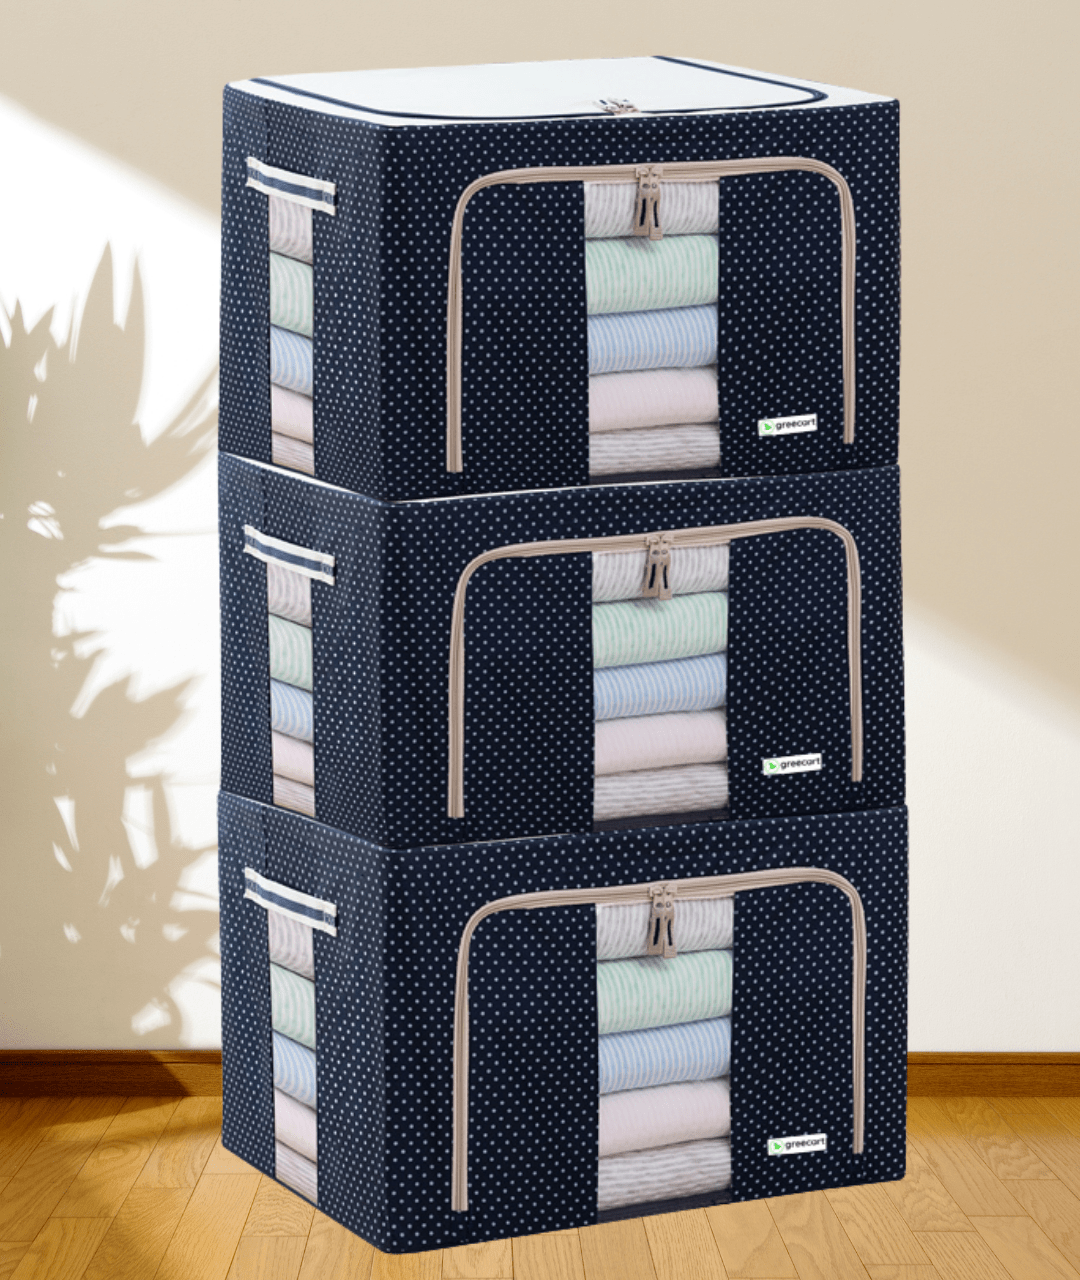 Greecart Oxford Fabric Storage Boxes - Clothes, Sarees, Bed Sheets, Blanket Etc